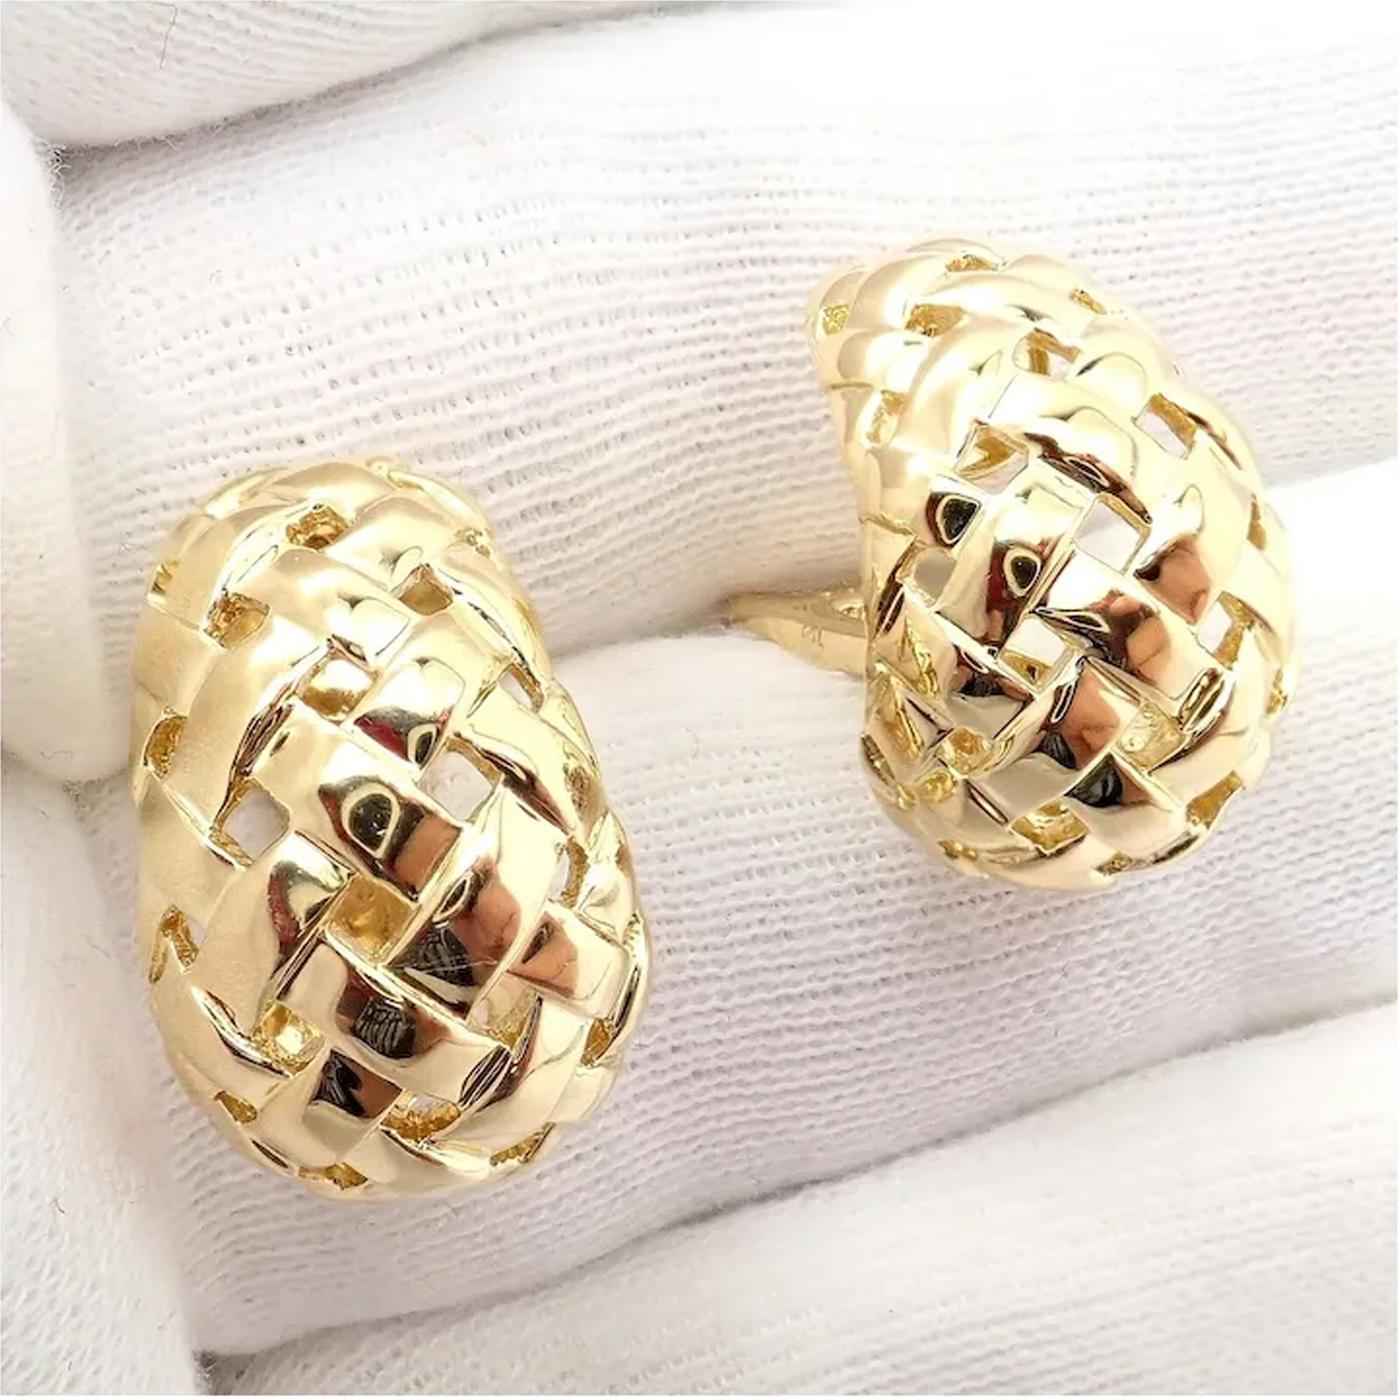 Tiffany & Co. 18k Yellow Gold Vannerie Basket Weave Earrings Rare Authentic In Good Condition For Sale In Aventura, FL